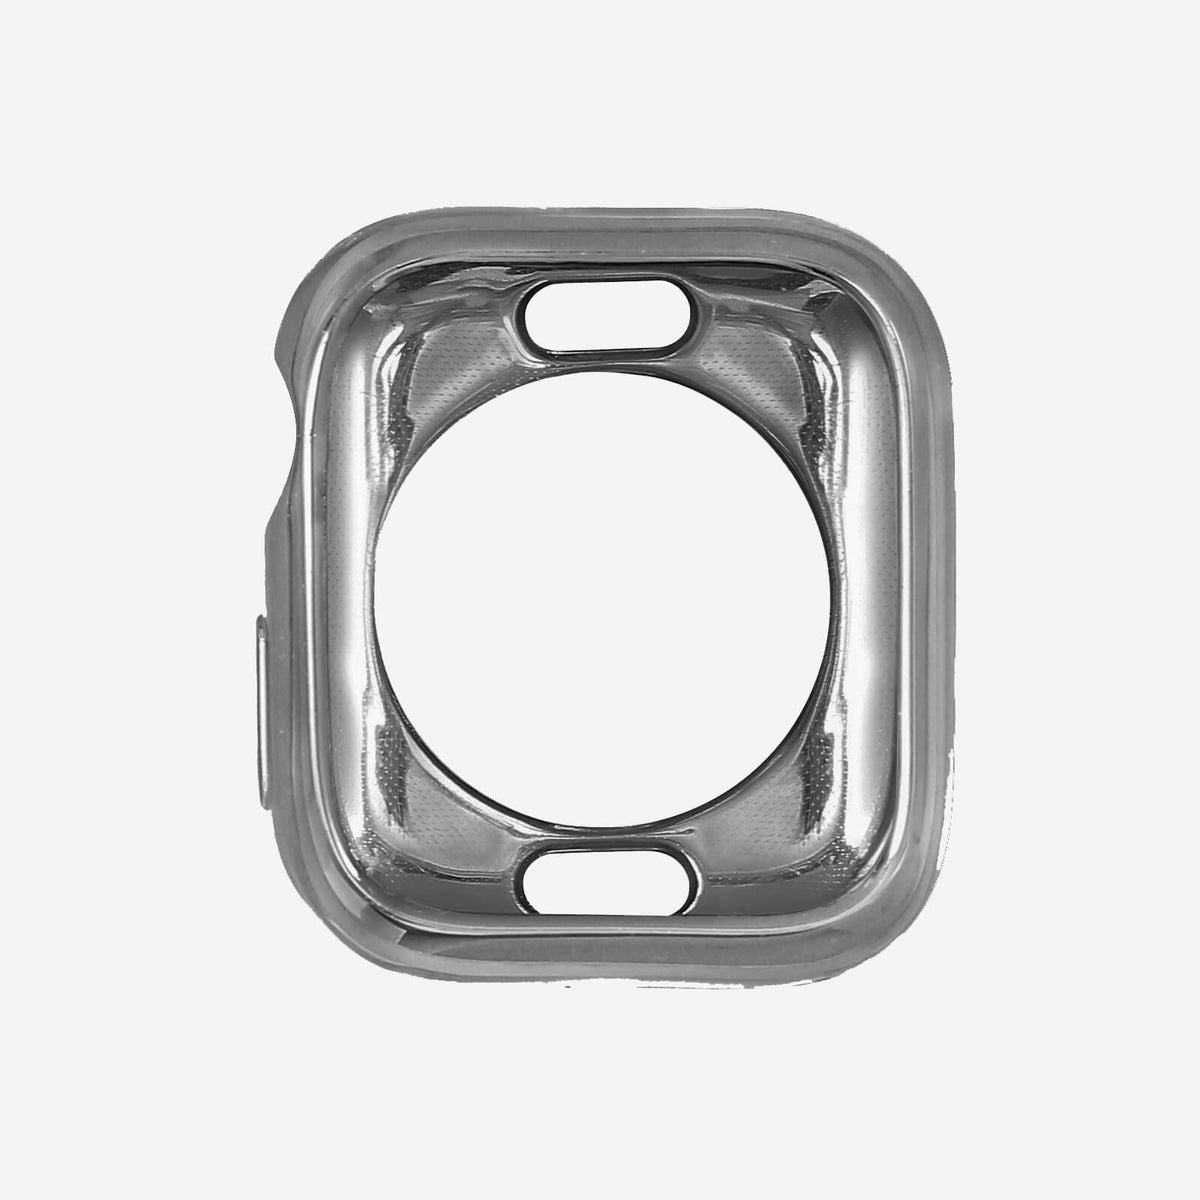 Apple Watch TPU Chrome Bumper Protection Case - Silver